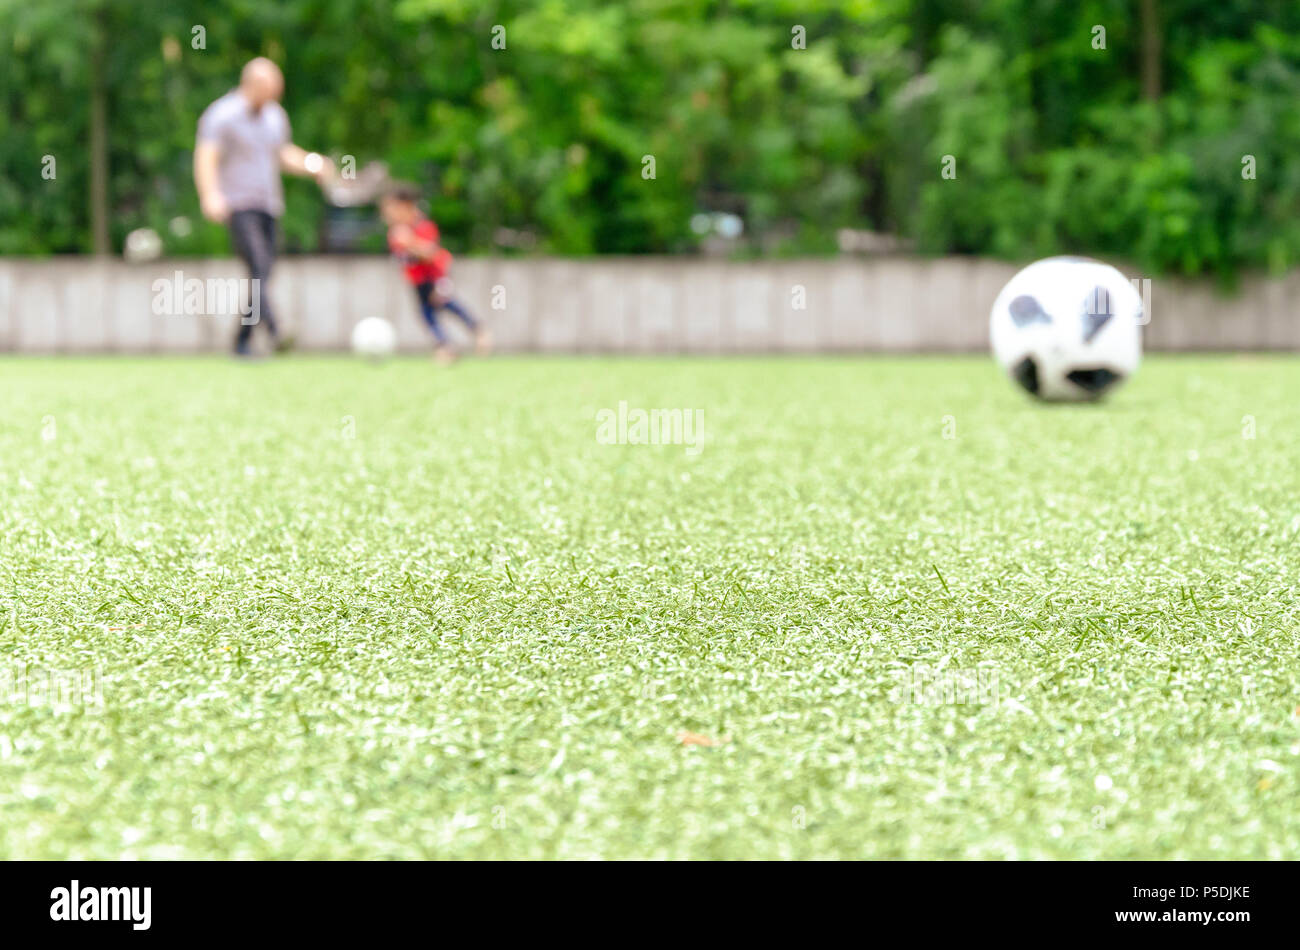 Football lawn, Father and kid playing in back. Soccer closeup detail wallpaper texture. Stock Photo